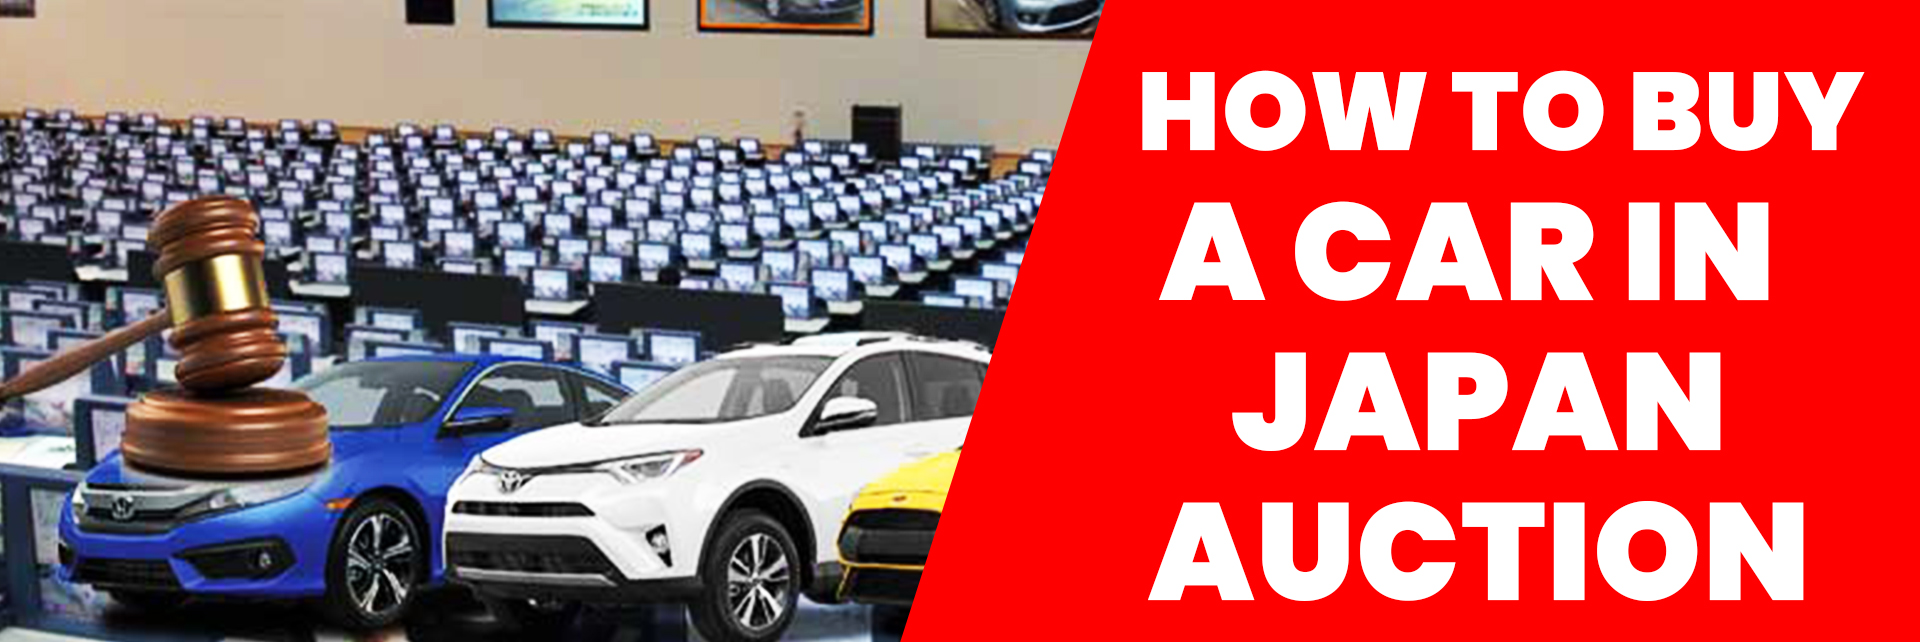 How To Buy A Car in Japan Auction